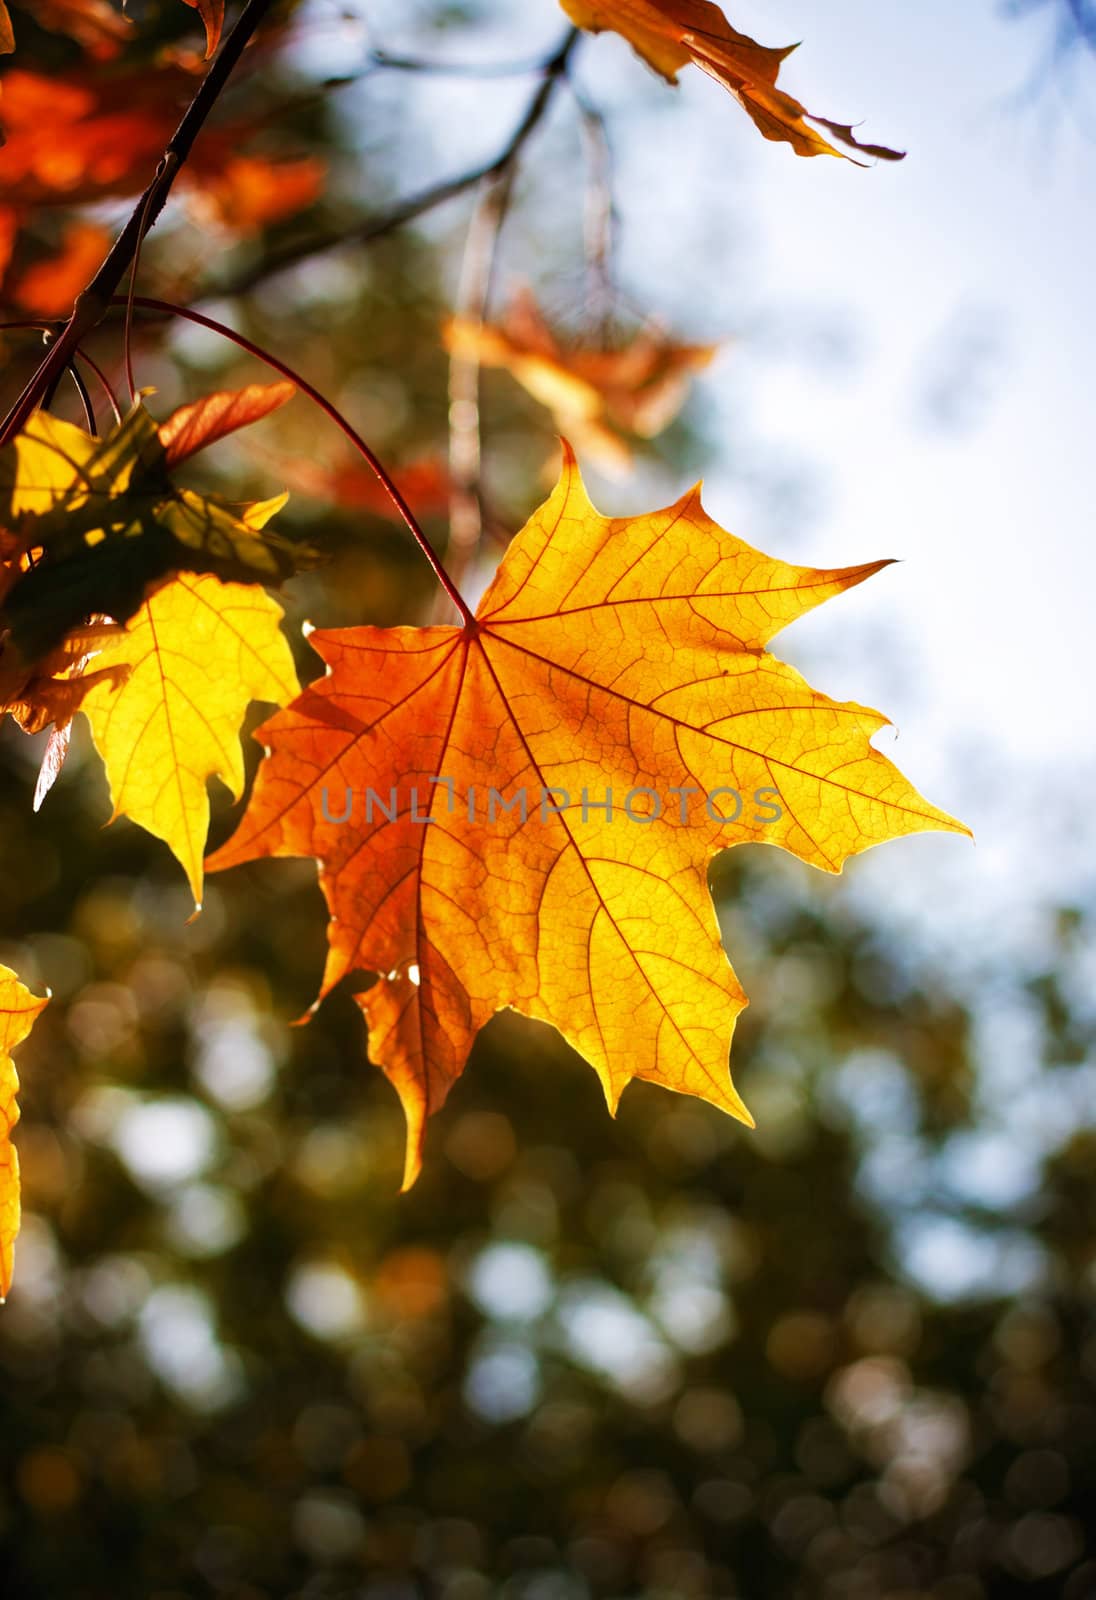 autumn maple leaves by petr_malyshev